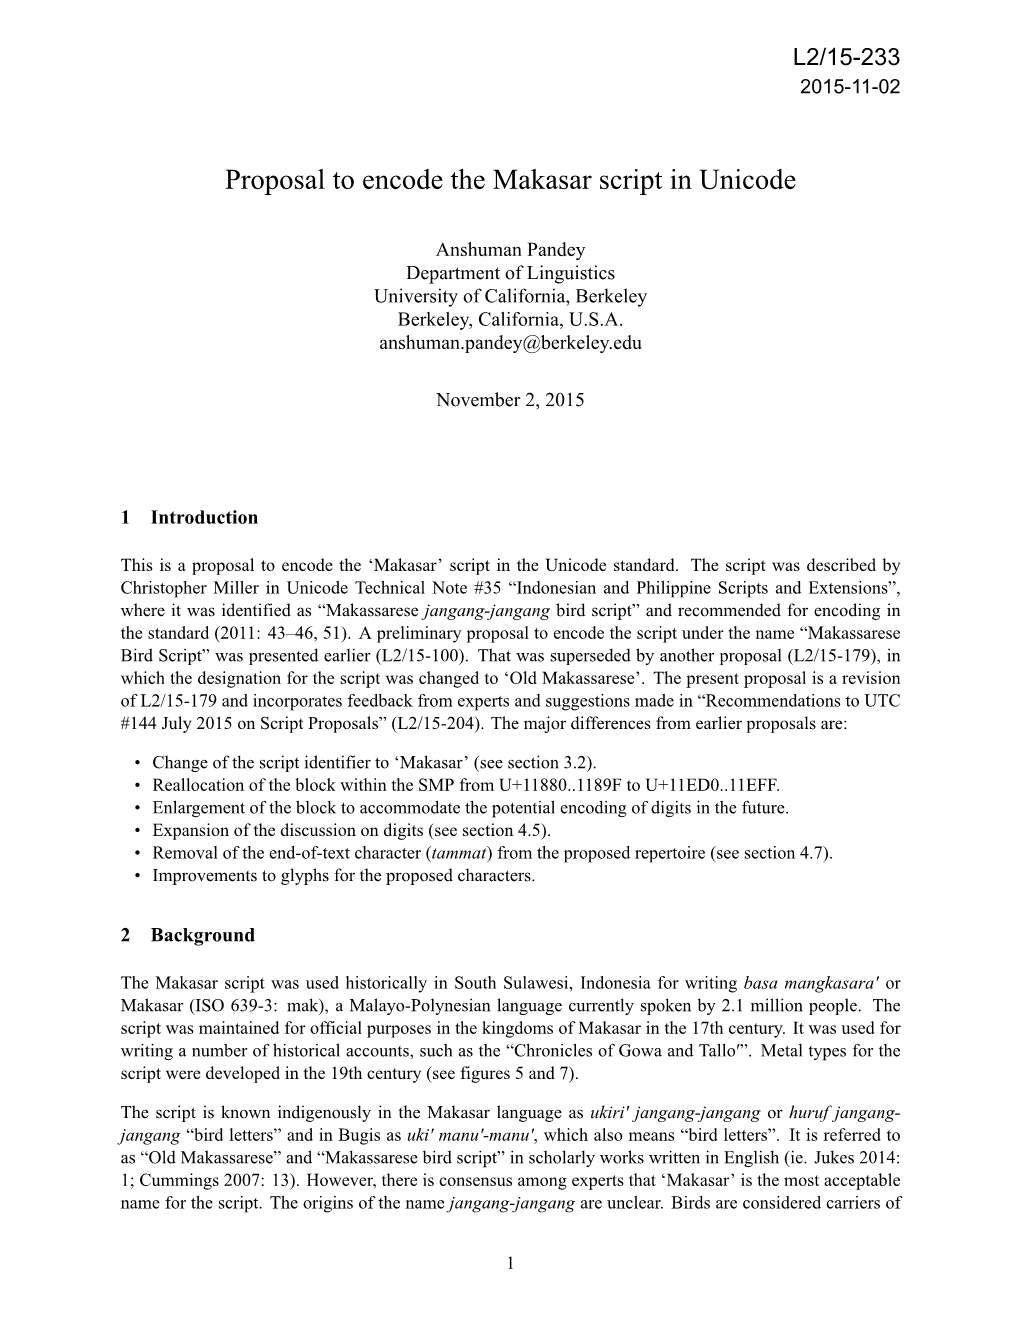 Proposal to Encode the Makasar Script in Unicode